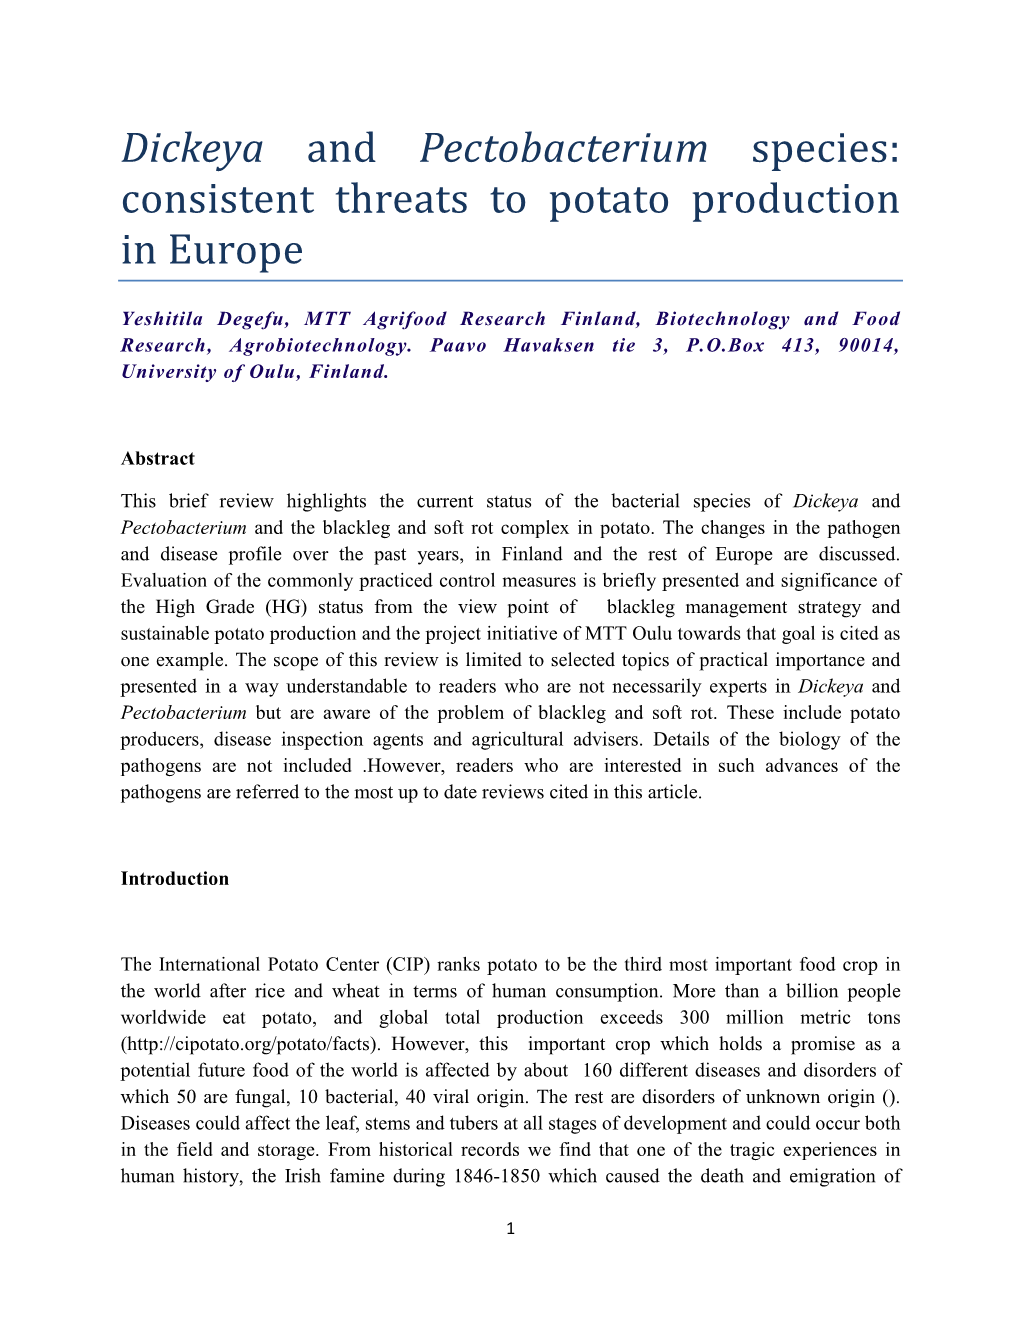 Dickeya and Pectobacterium Species: Consistent Threats to Potato Production in Europe